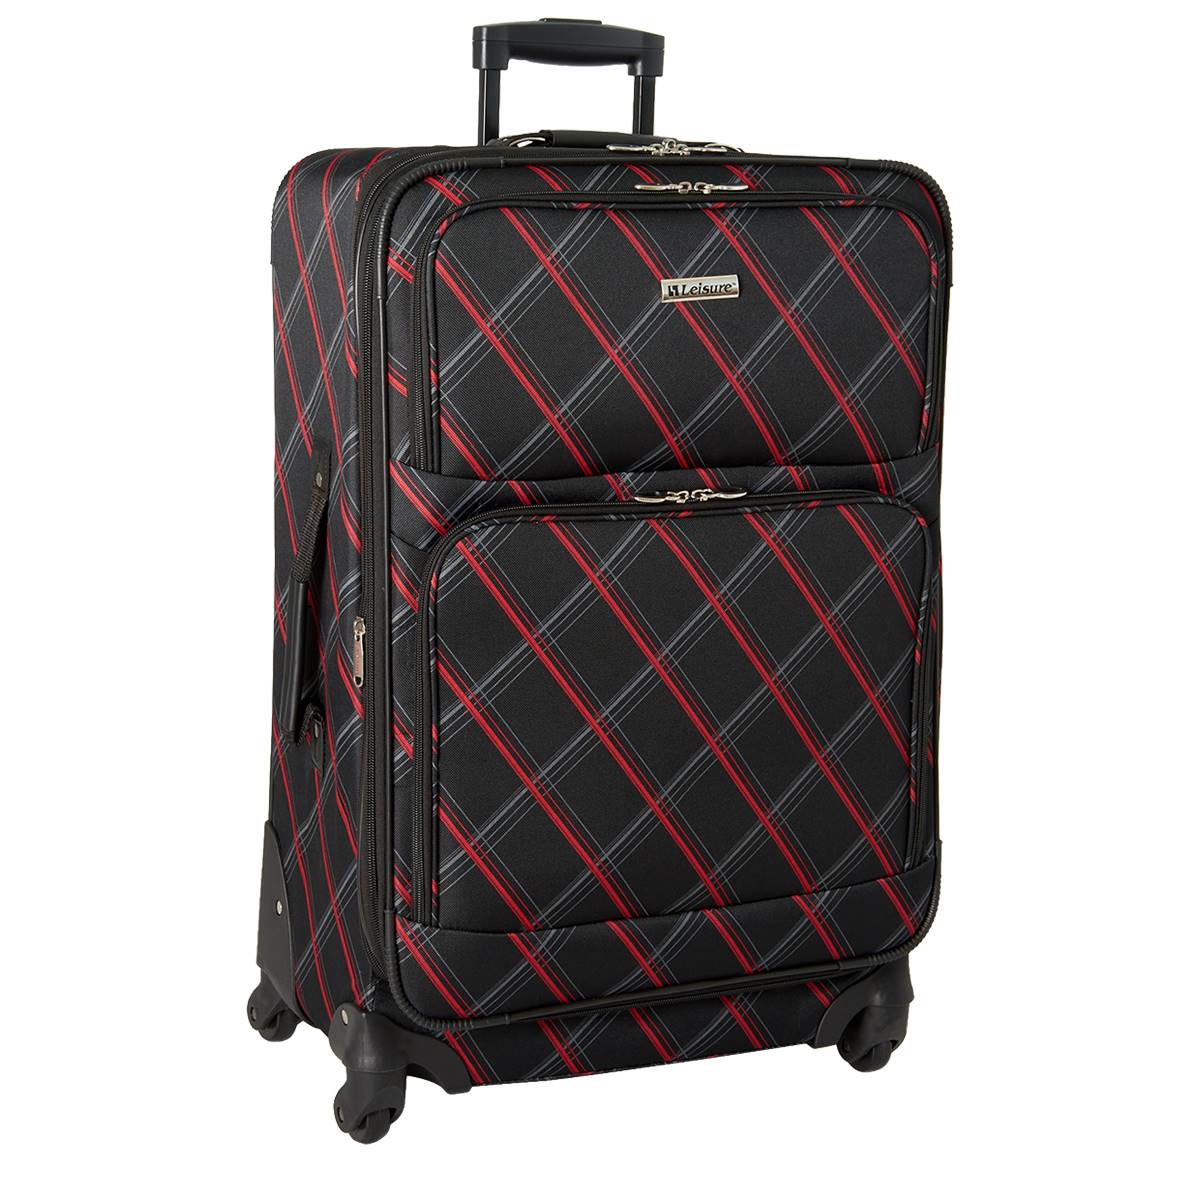 Leisure Lafayette 21in. Spinner Luggage - Black/Red